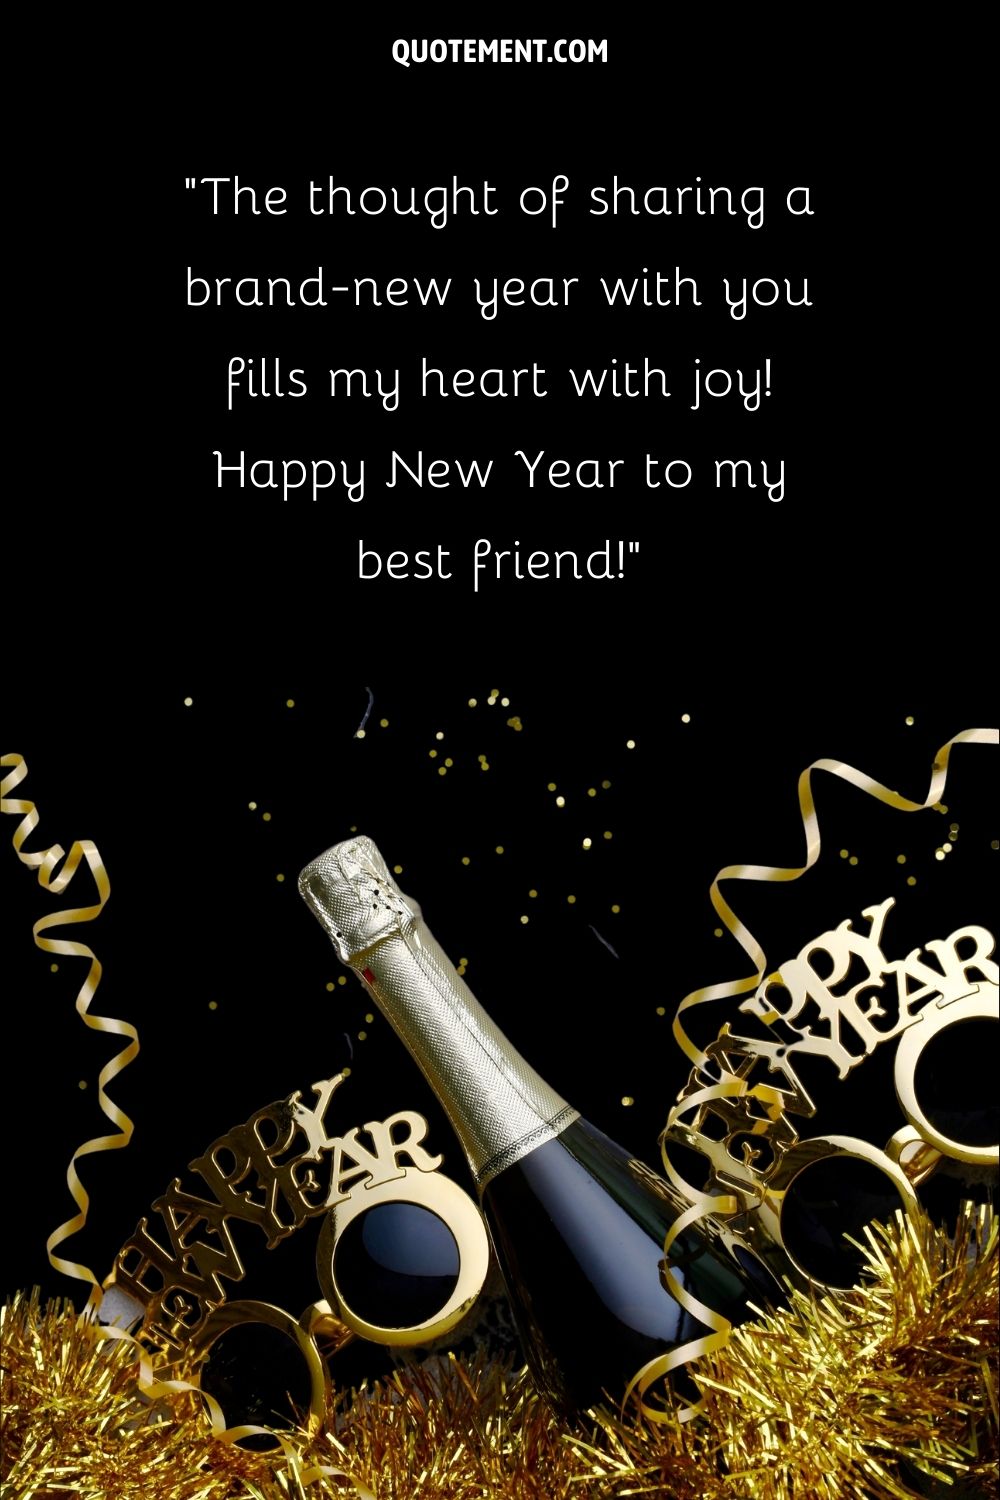 A New Year themed image featuring a champagne bottle, gold confetti, and glasses
